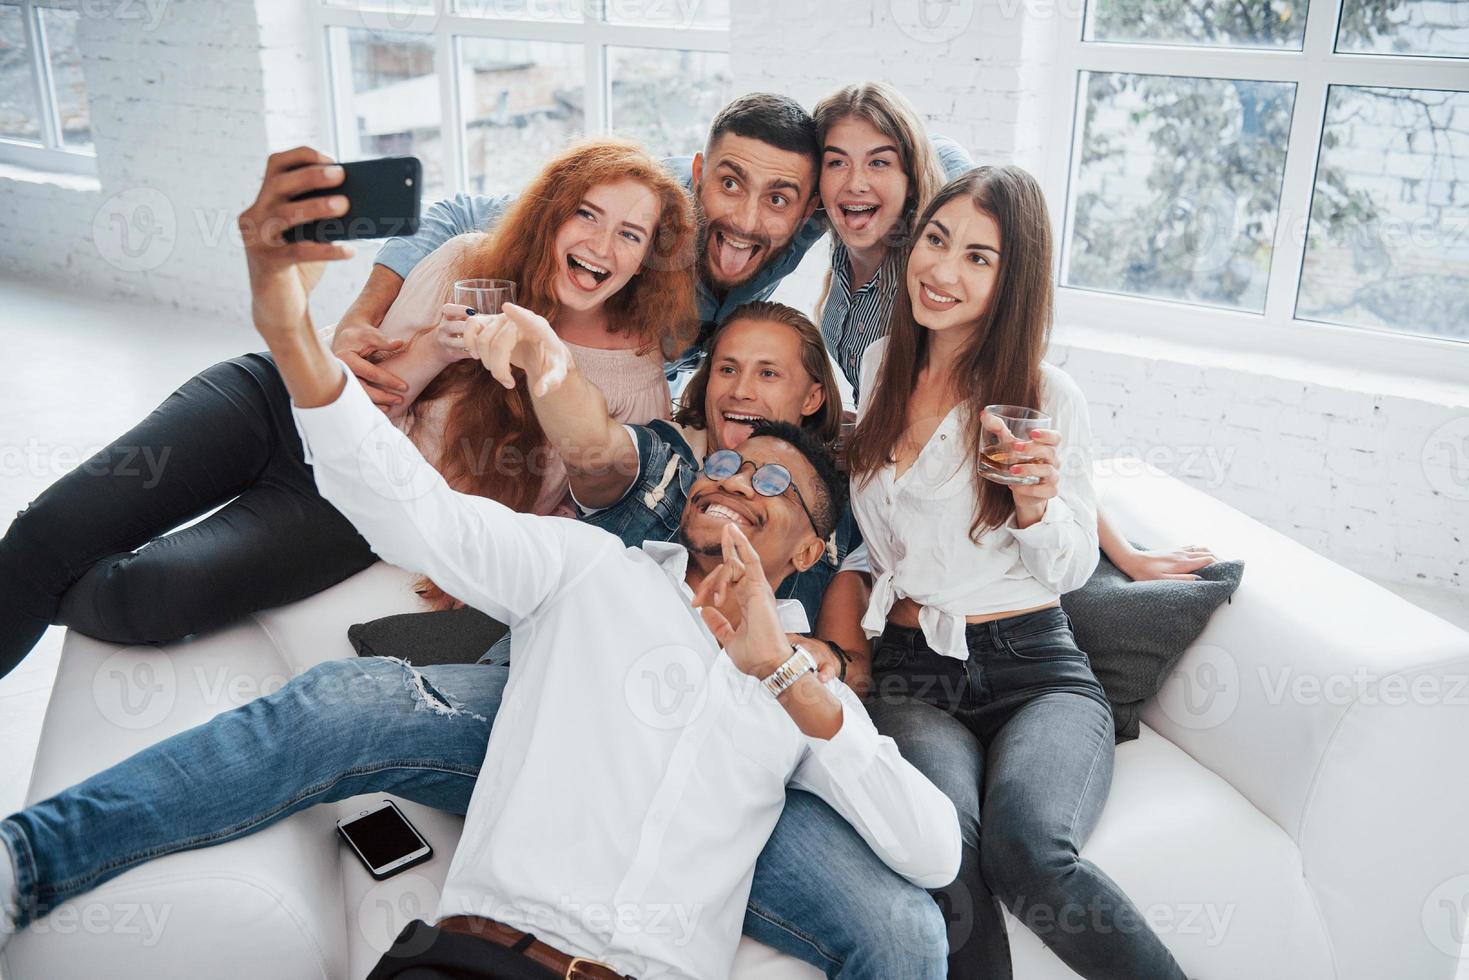 Showing tongues. Cheerful young friends having fun and drinking in the white interior photo